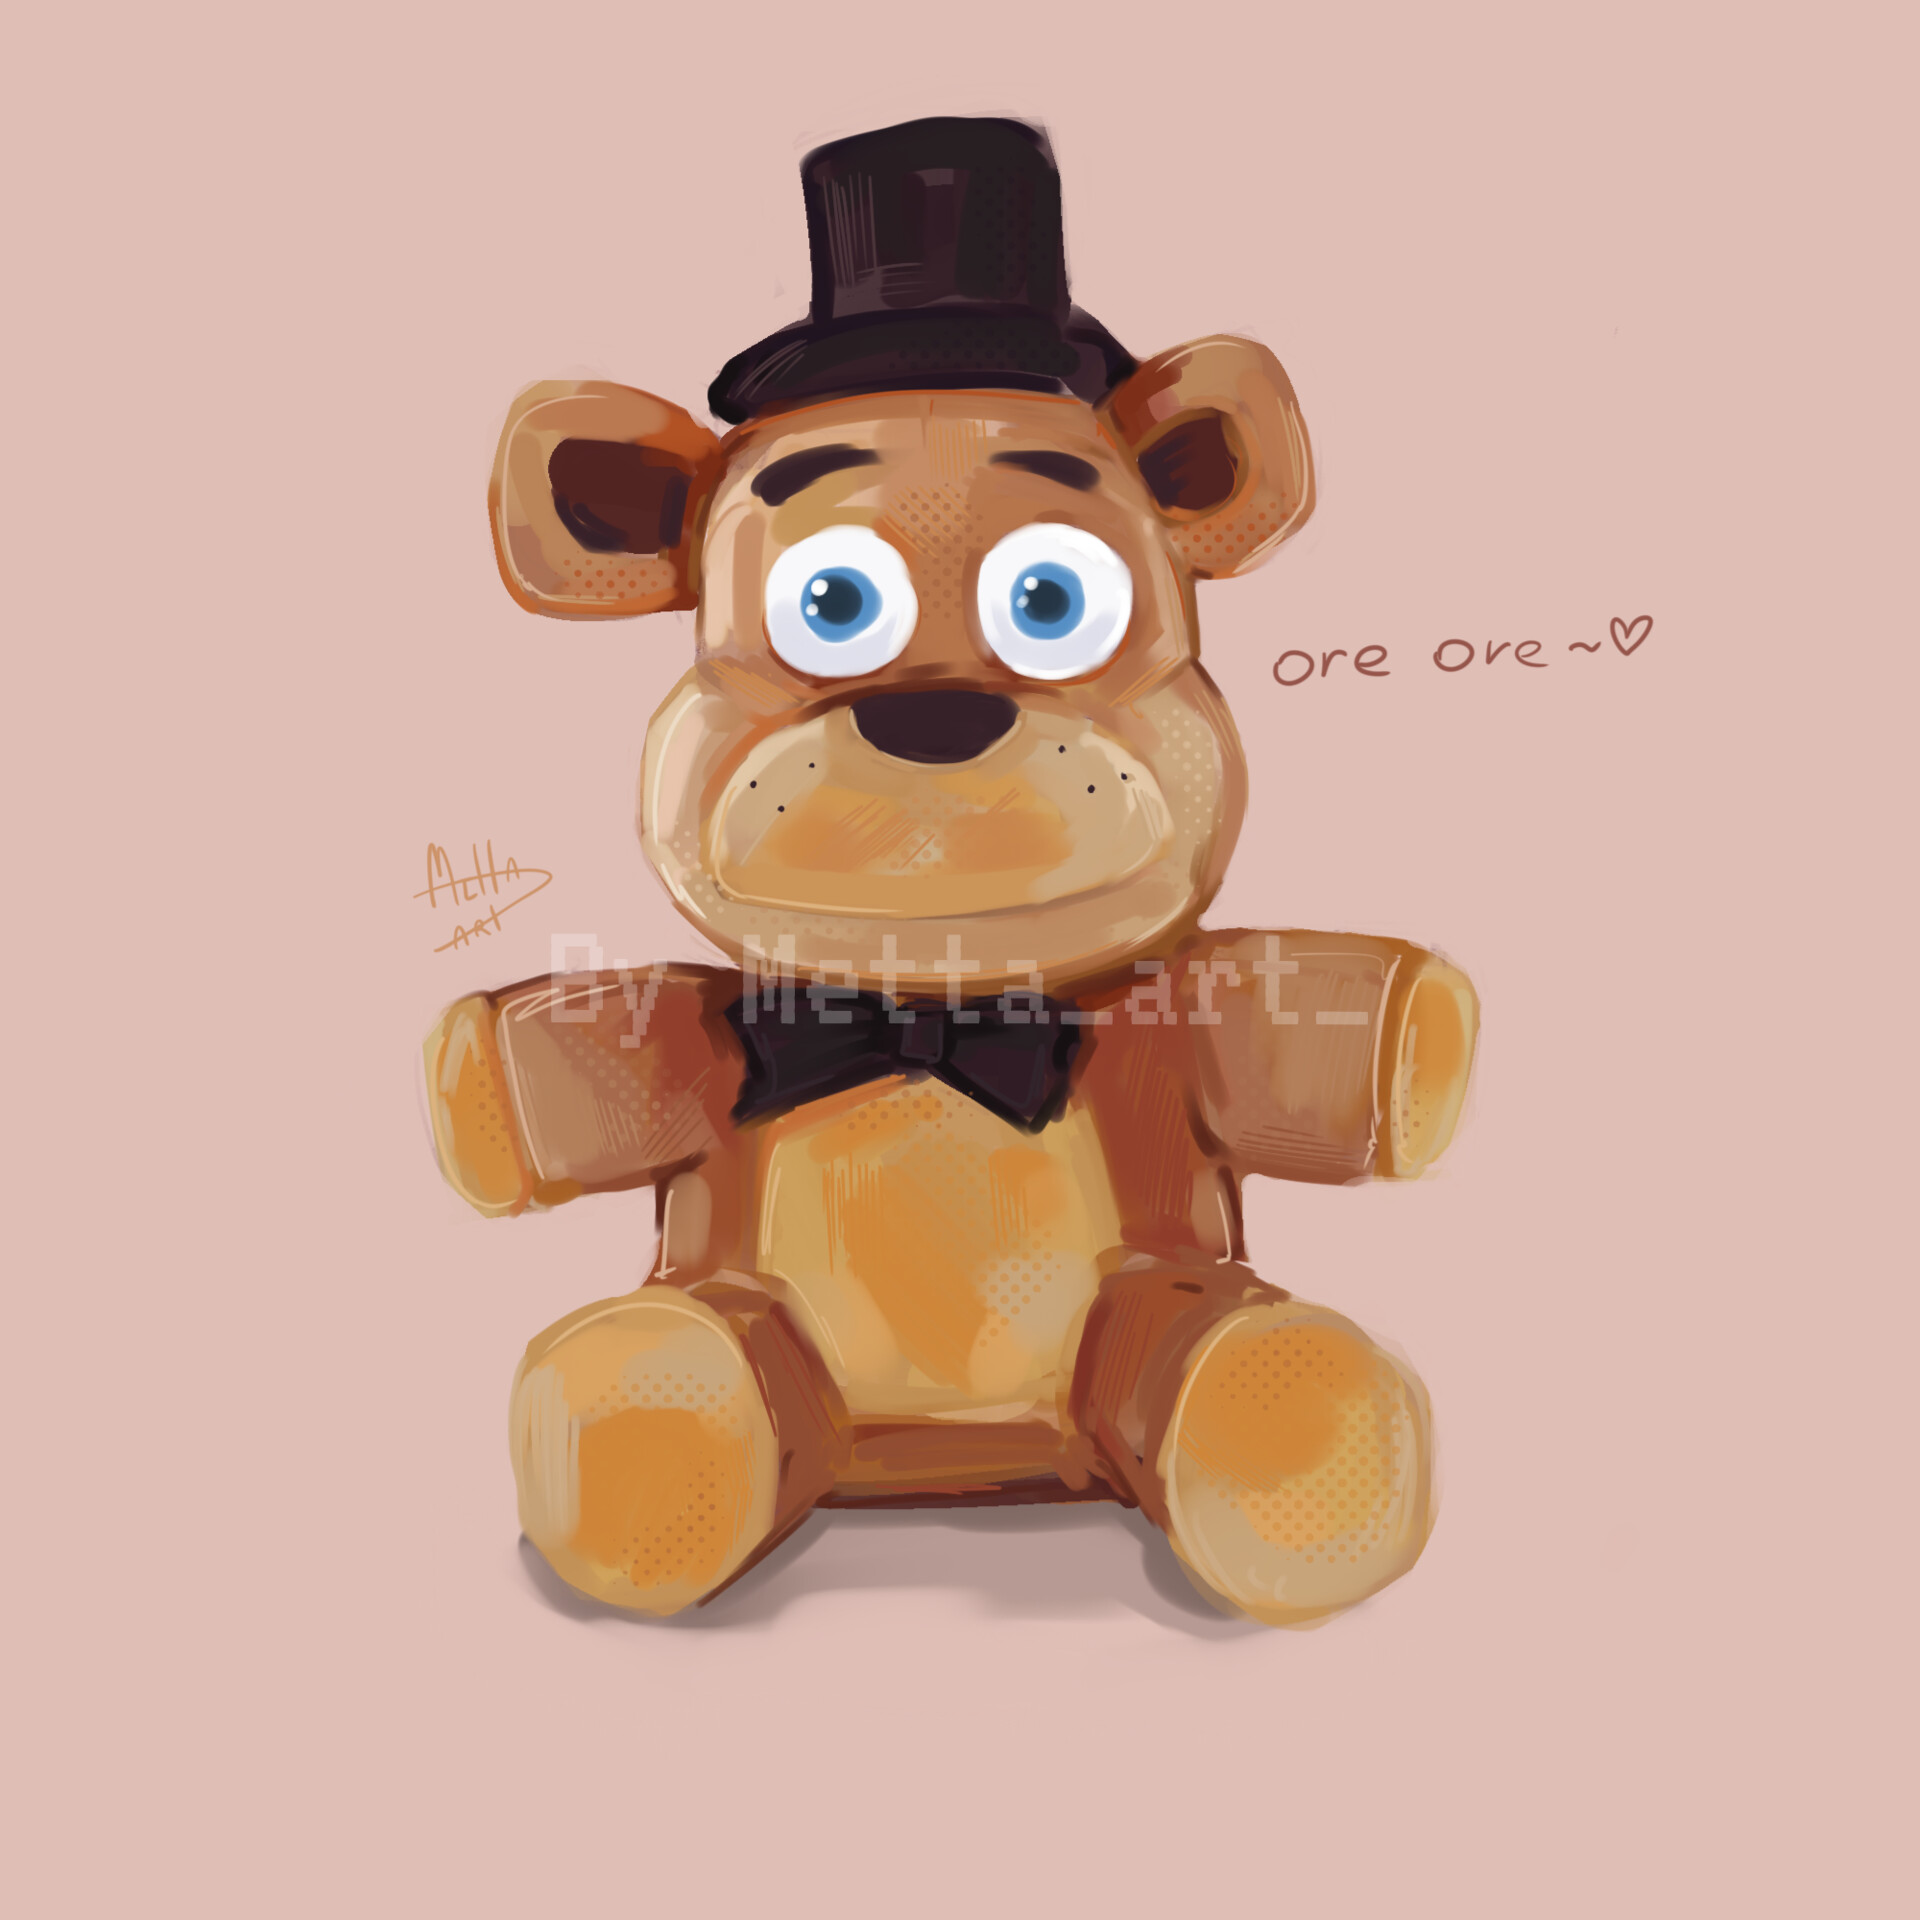 Withered Freddy Plush